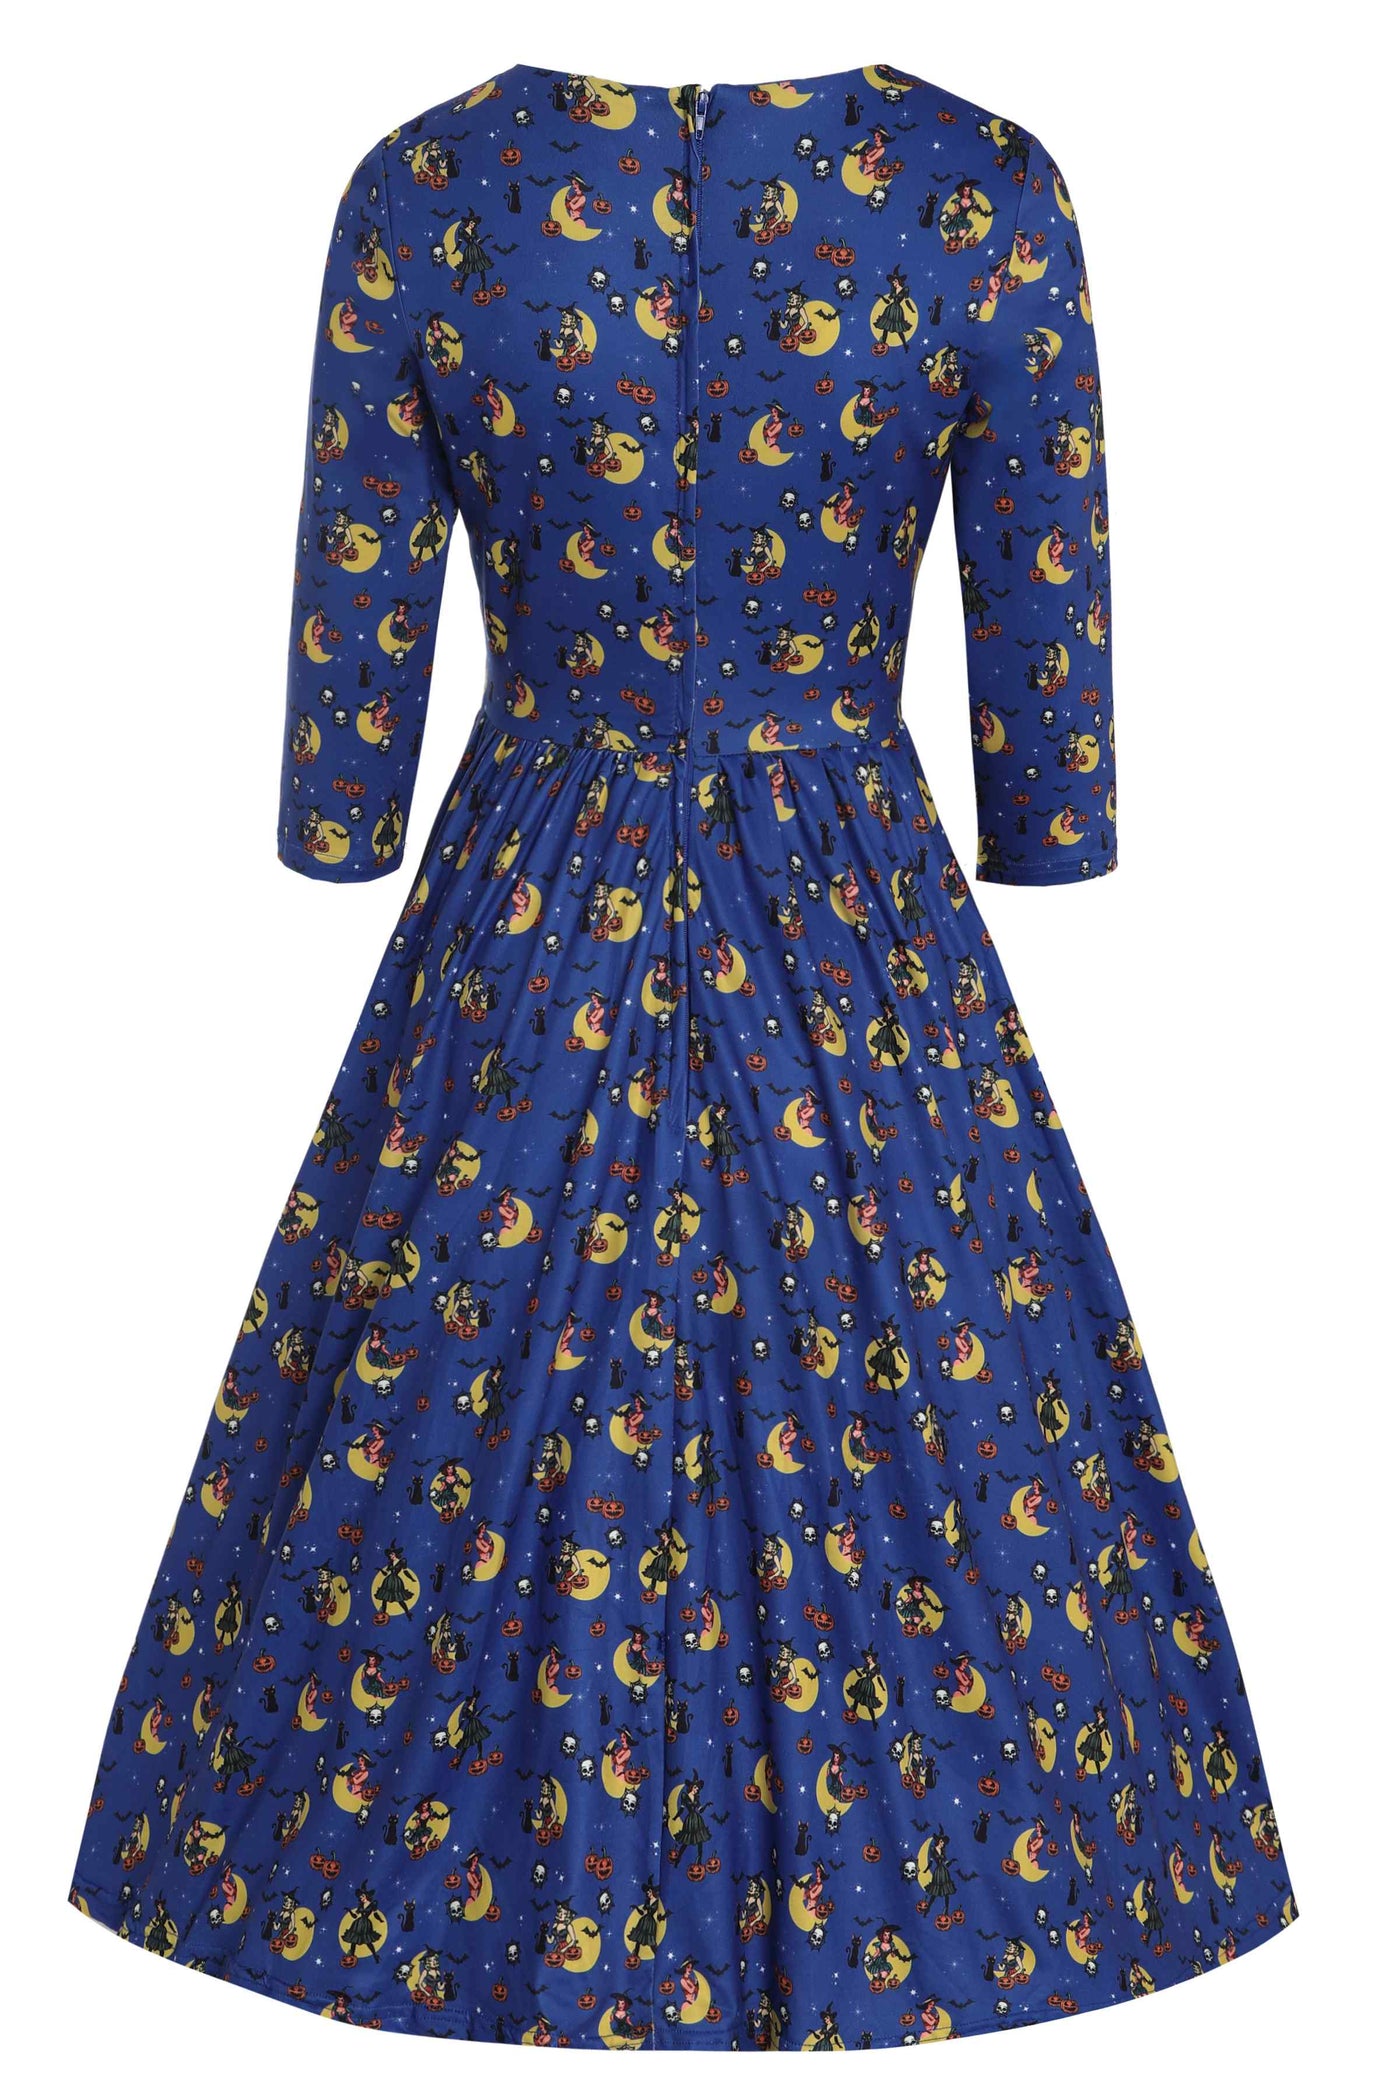 Back View of Pinup Witch Print Long Sleeved Dress in Blue